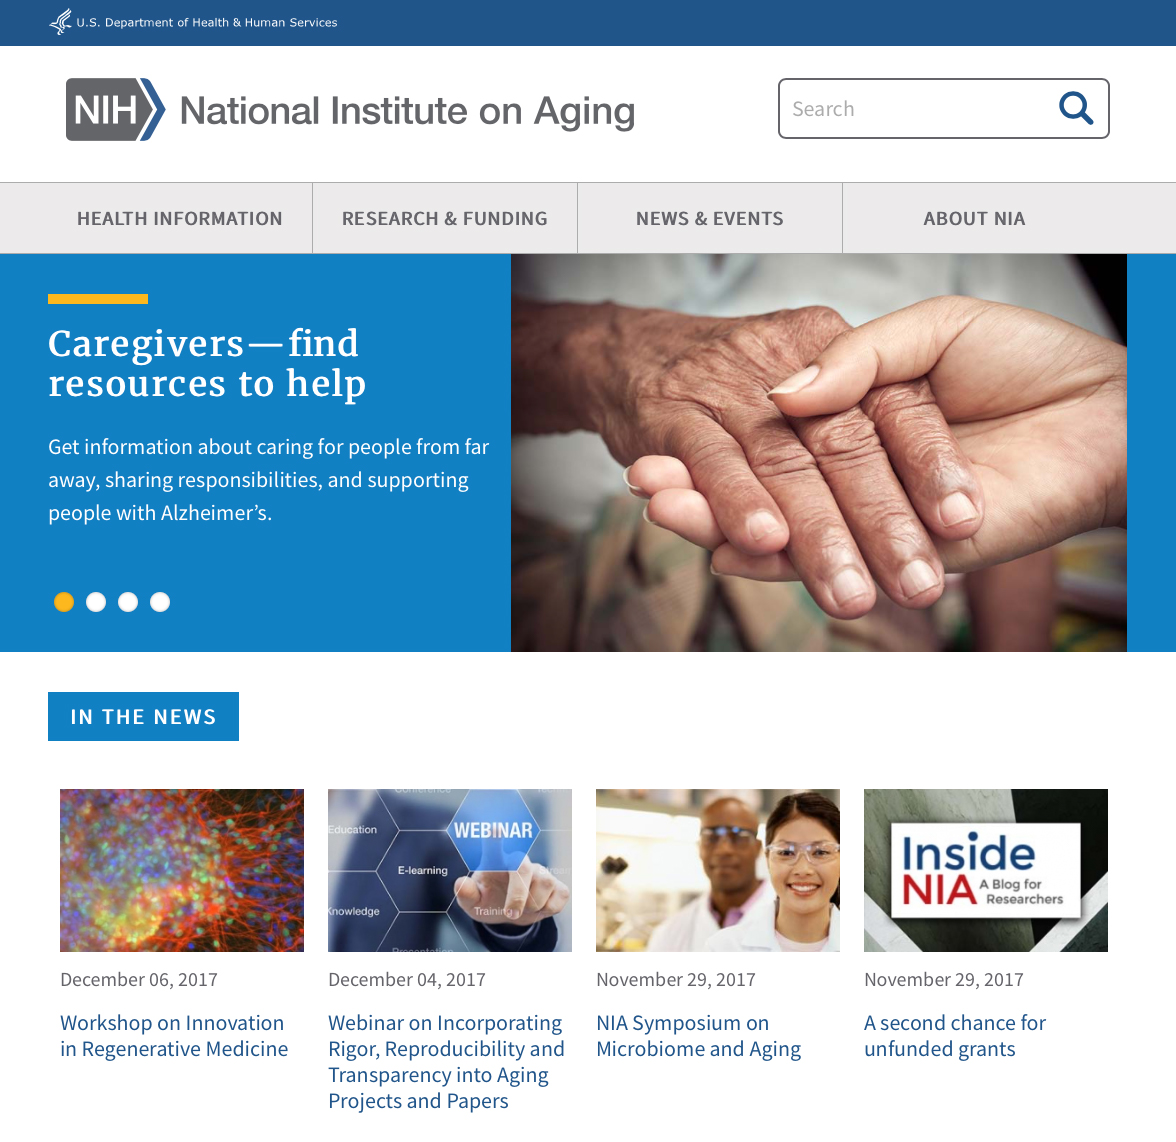 Screenshot of the National Institute on Aging website.